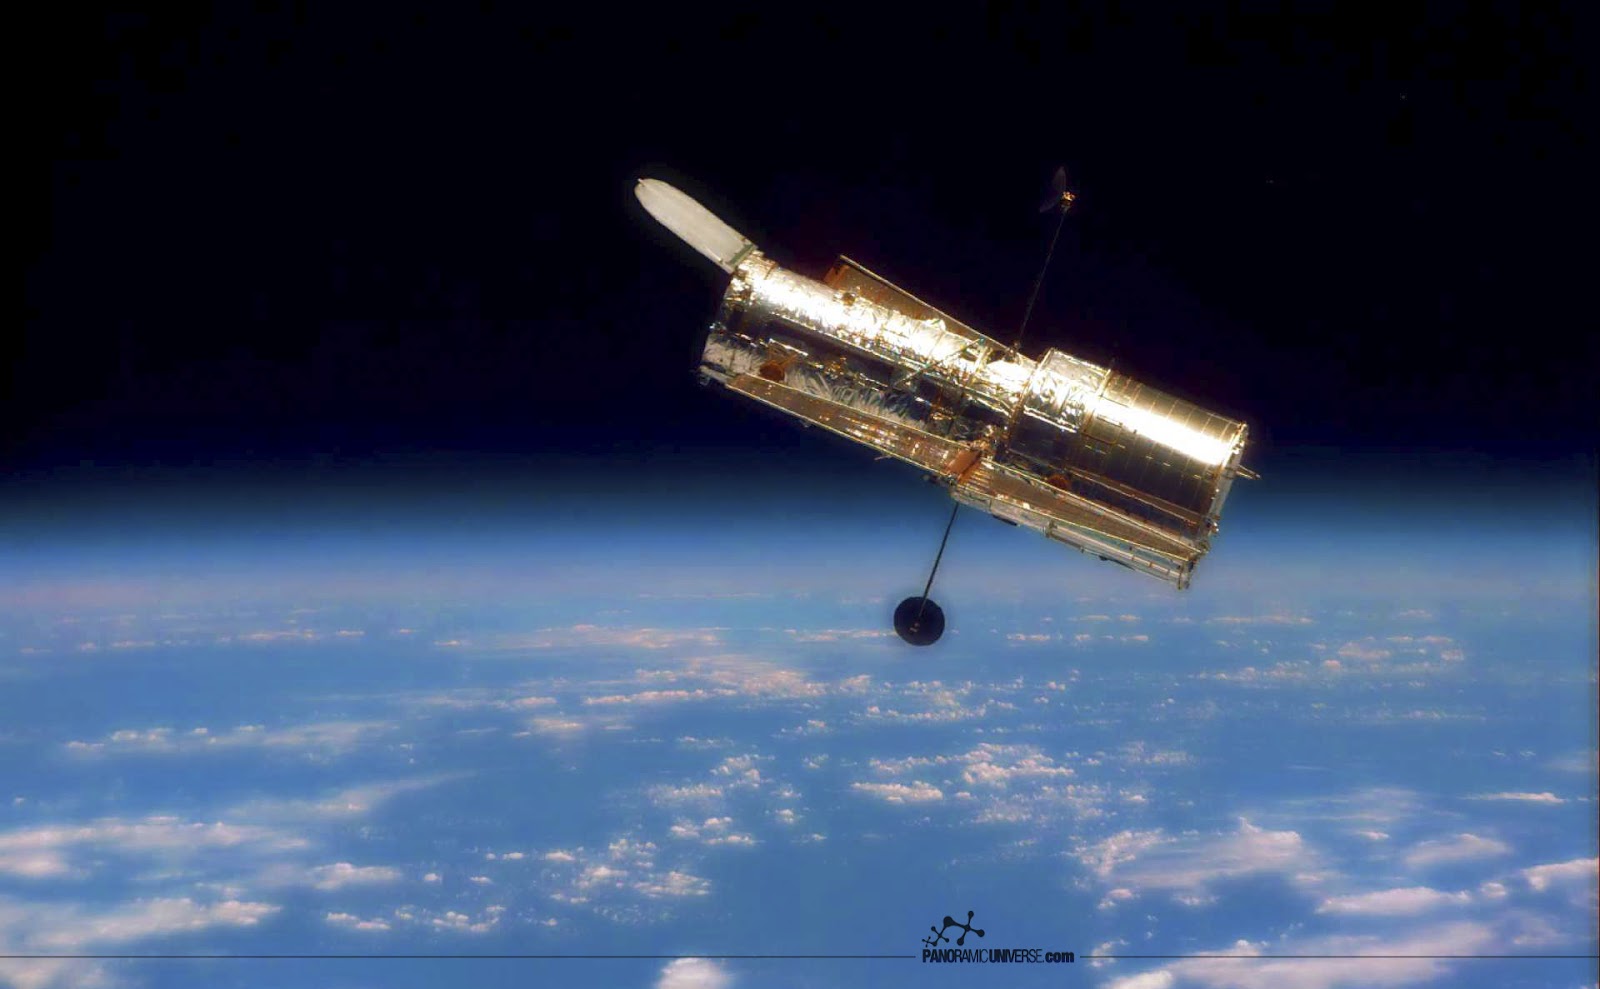 Image Taken By Hubble Telescope Wallpaper Pics About Space